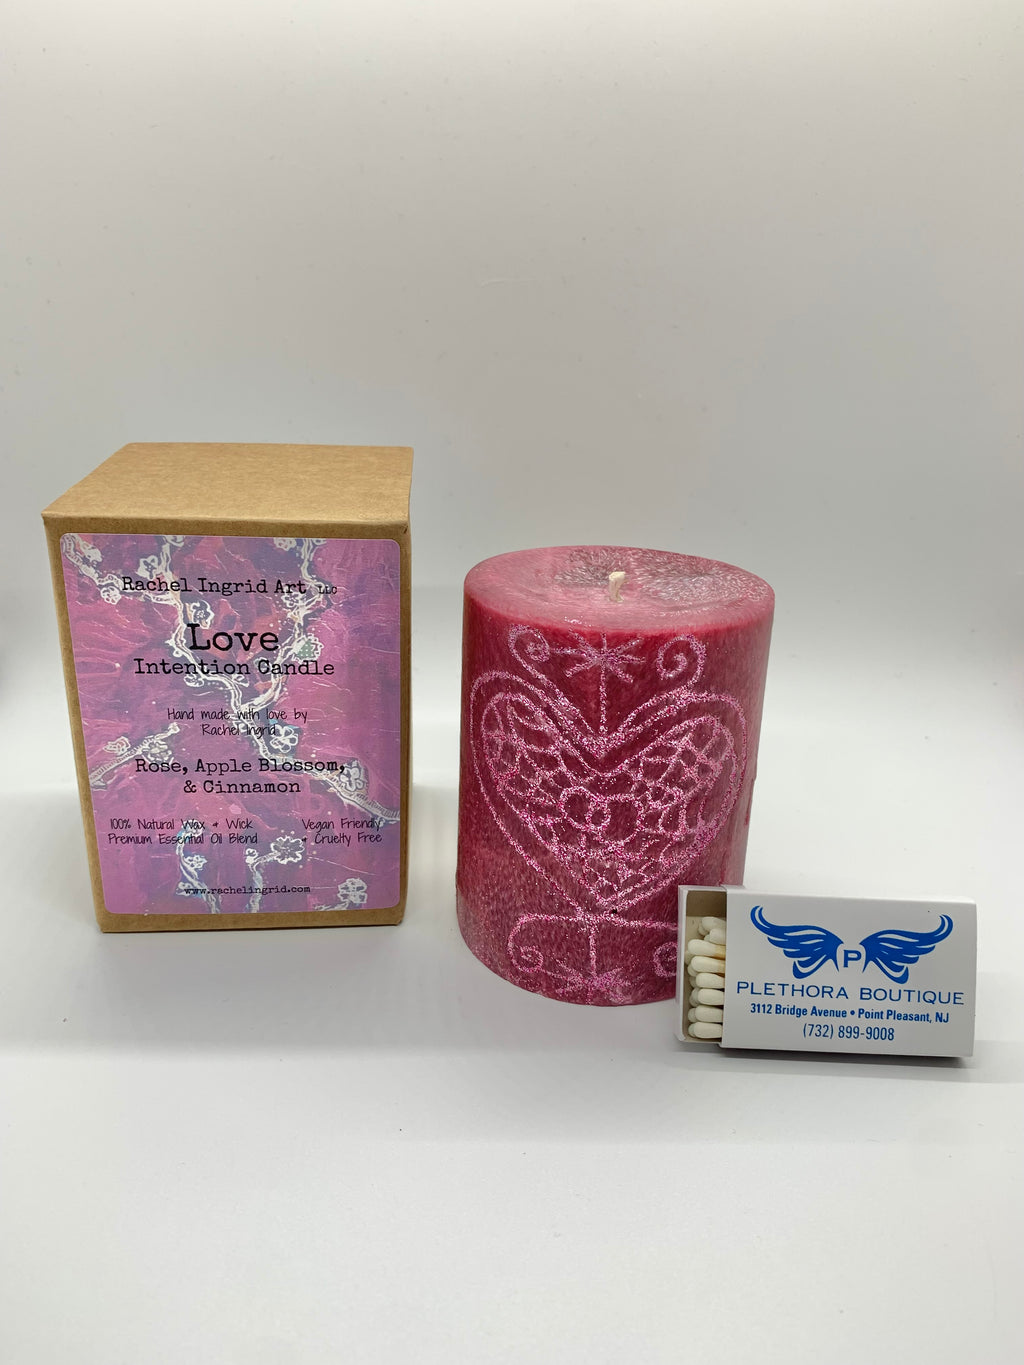 3x4 Love Intention Candle